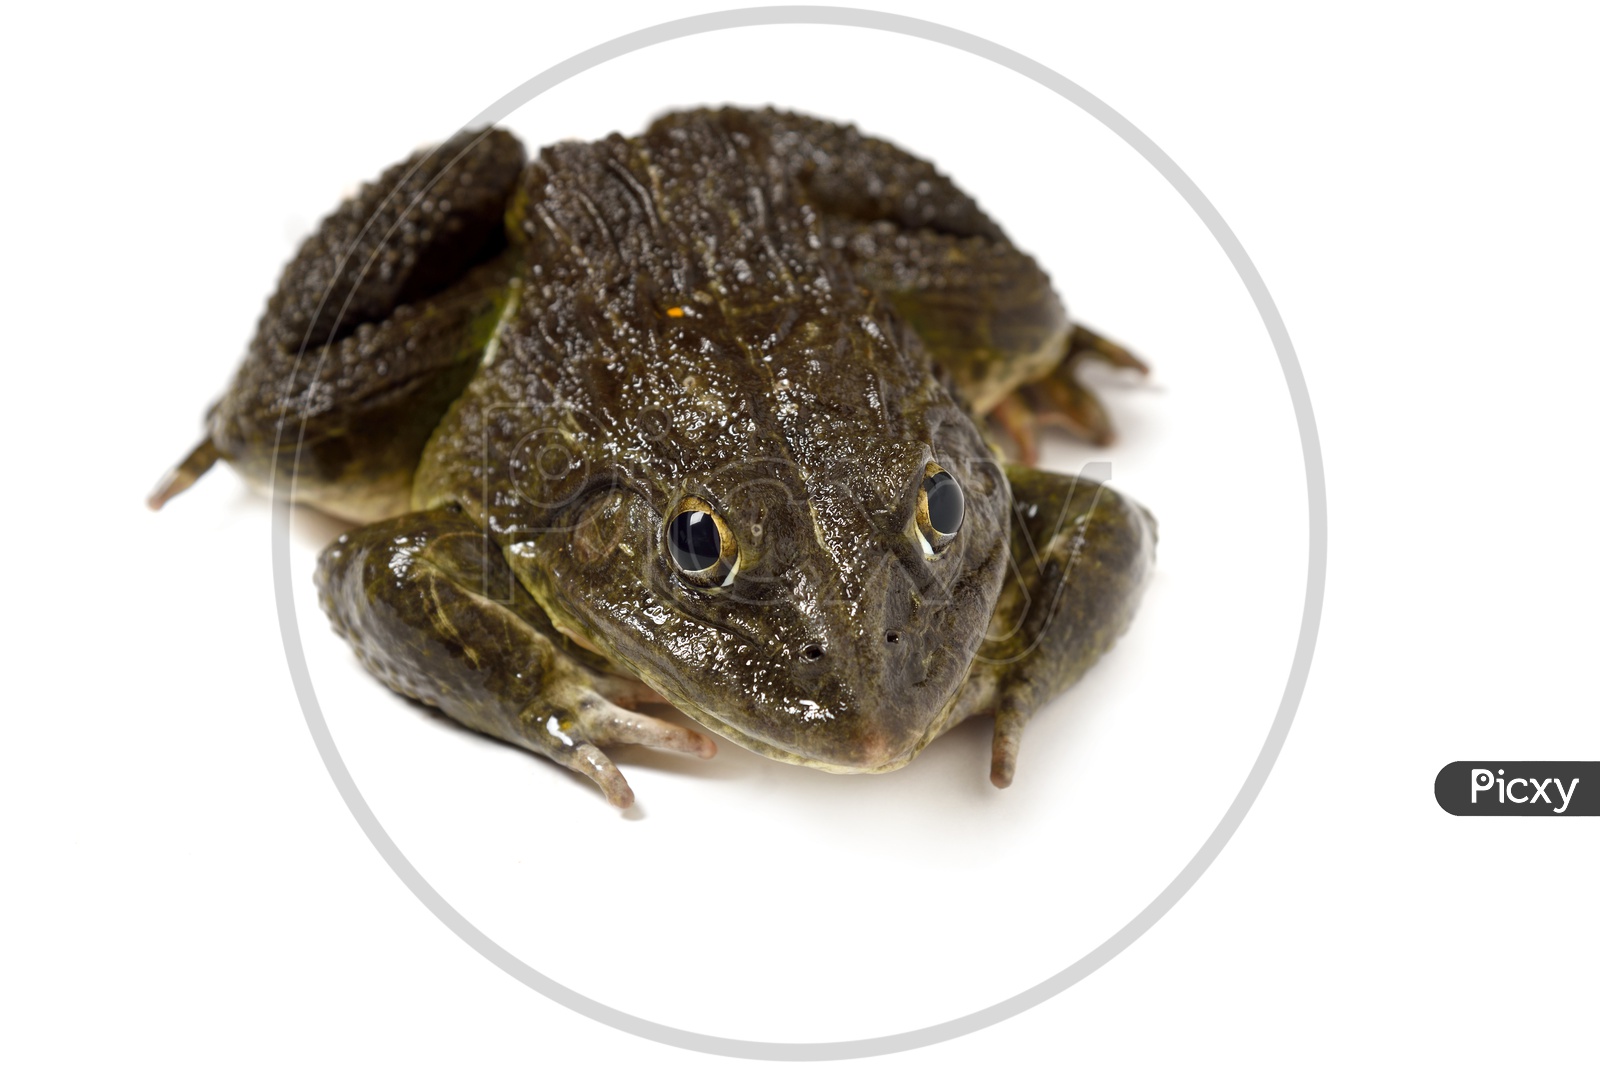 True Toad Frog Or Indian Pond Frog Isolated On an White Background